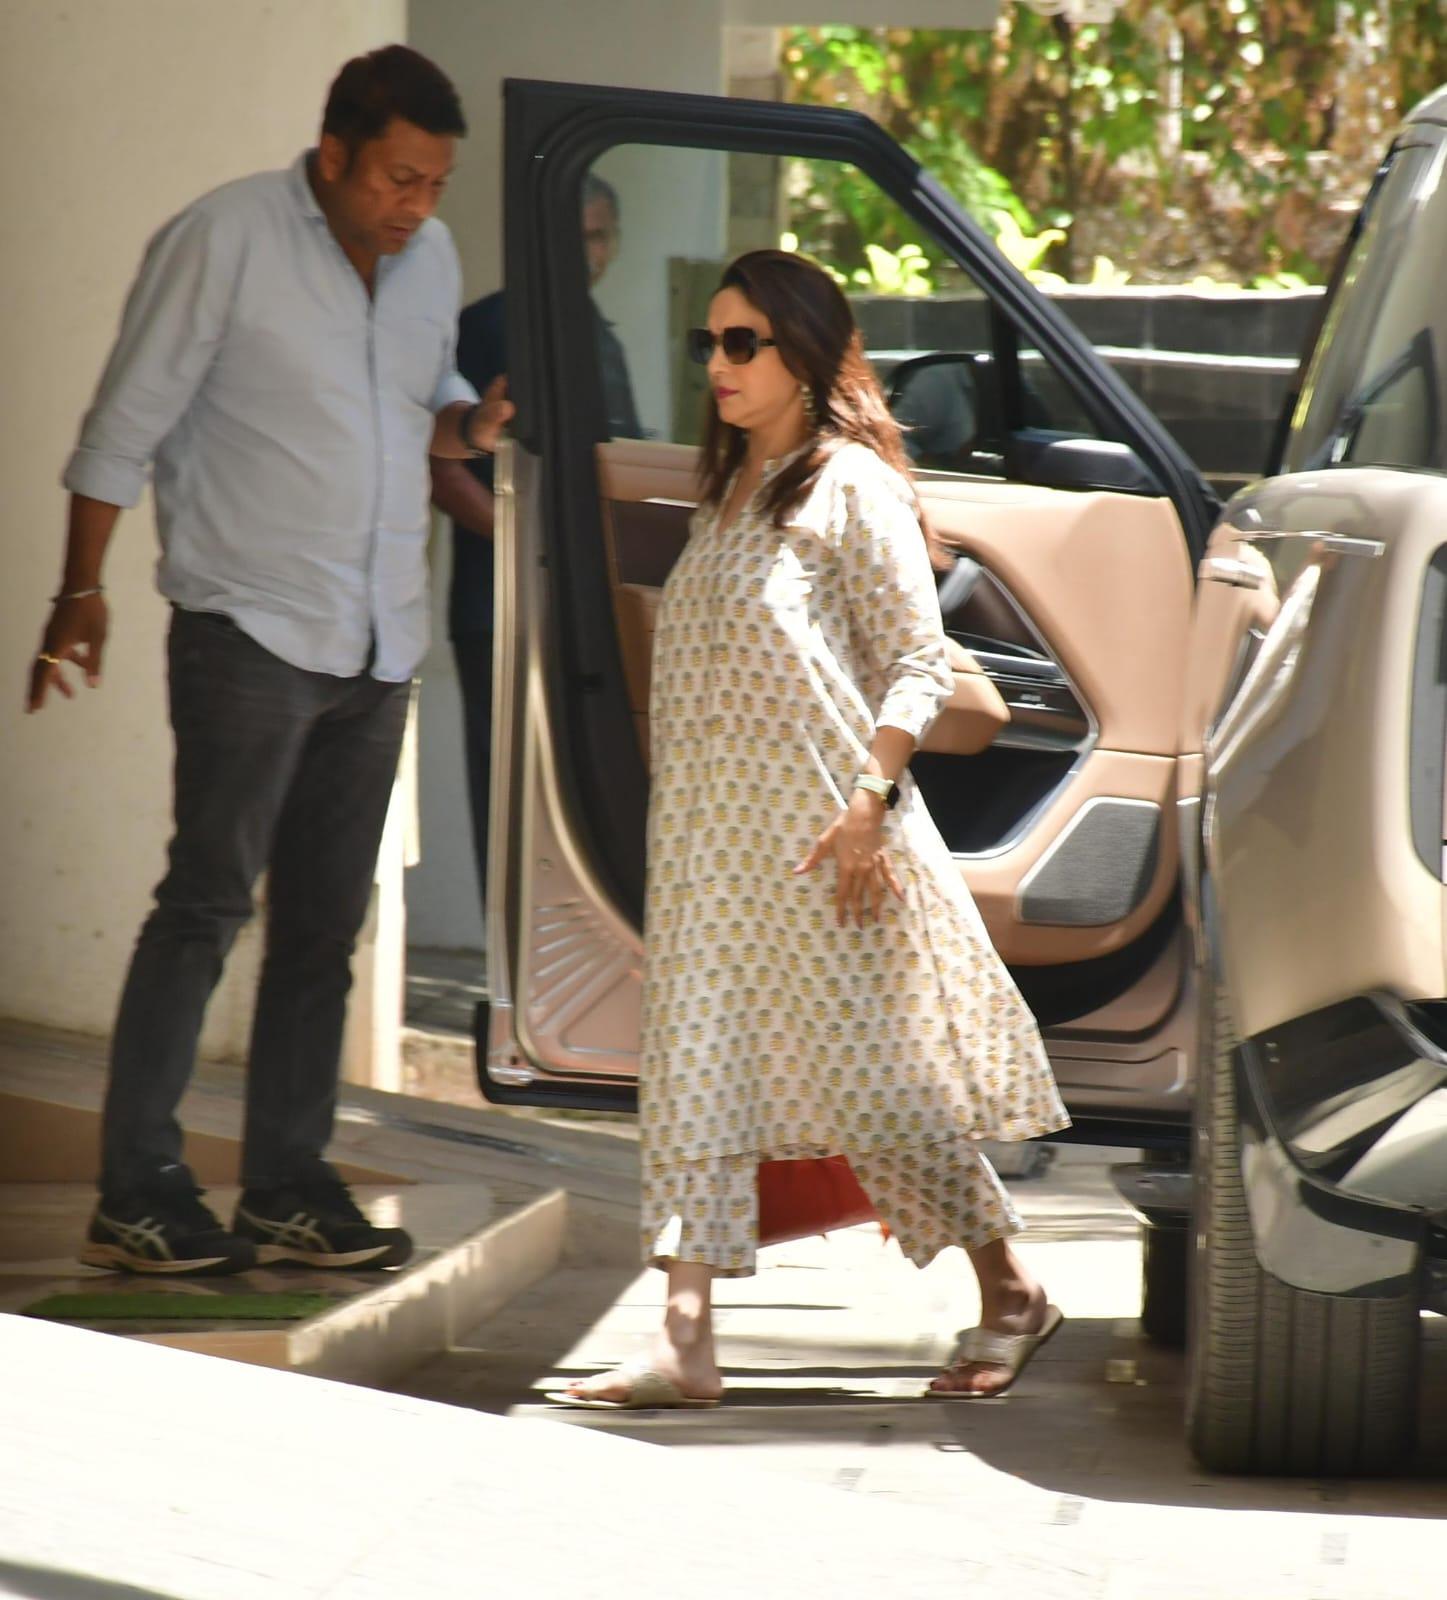 Madhuri Dixit looked stunning in a light-coloured suit as she was clicked in the city